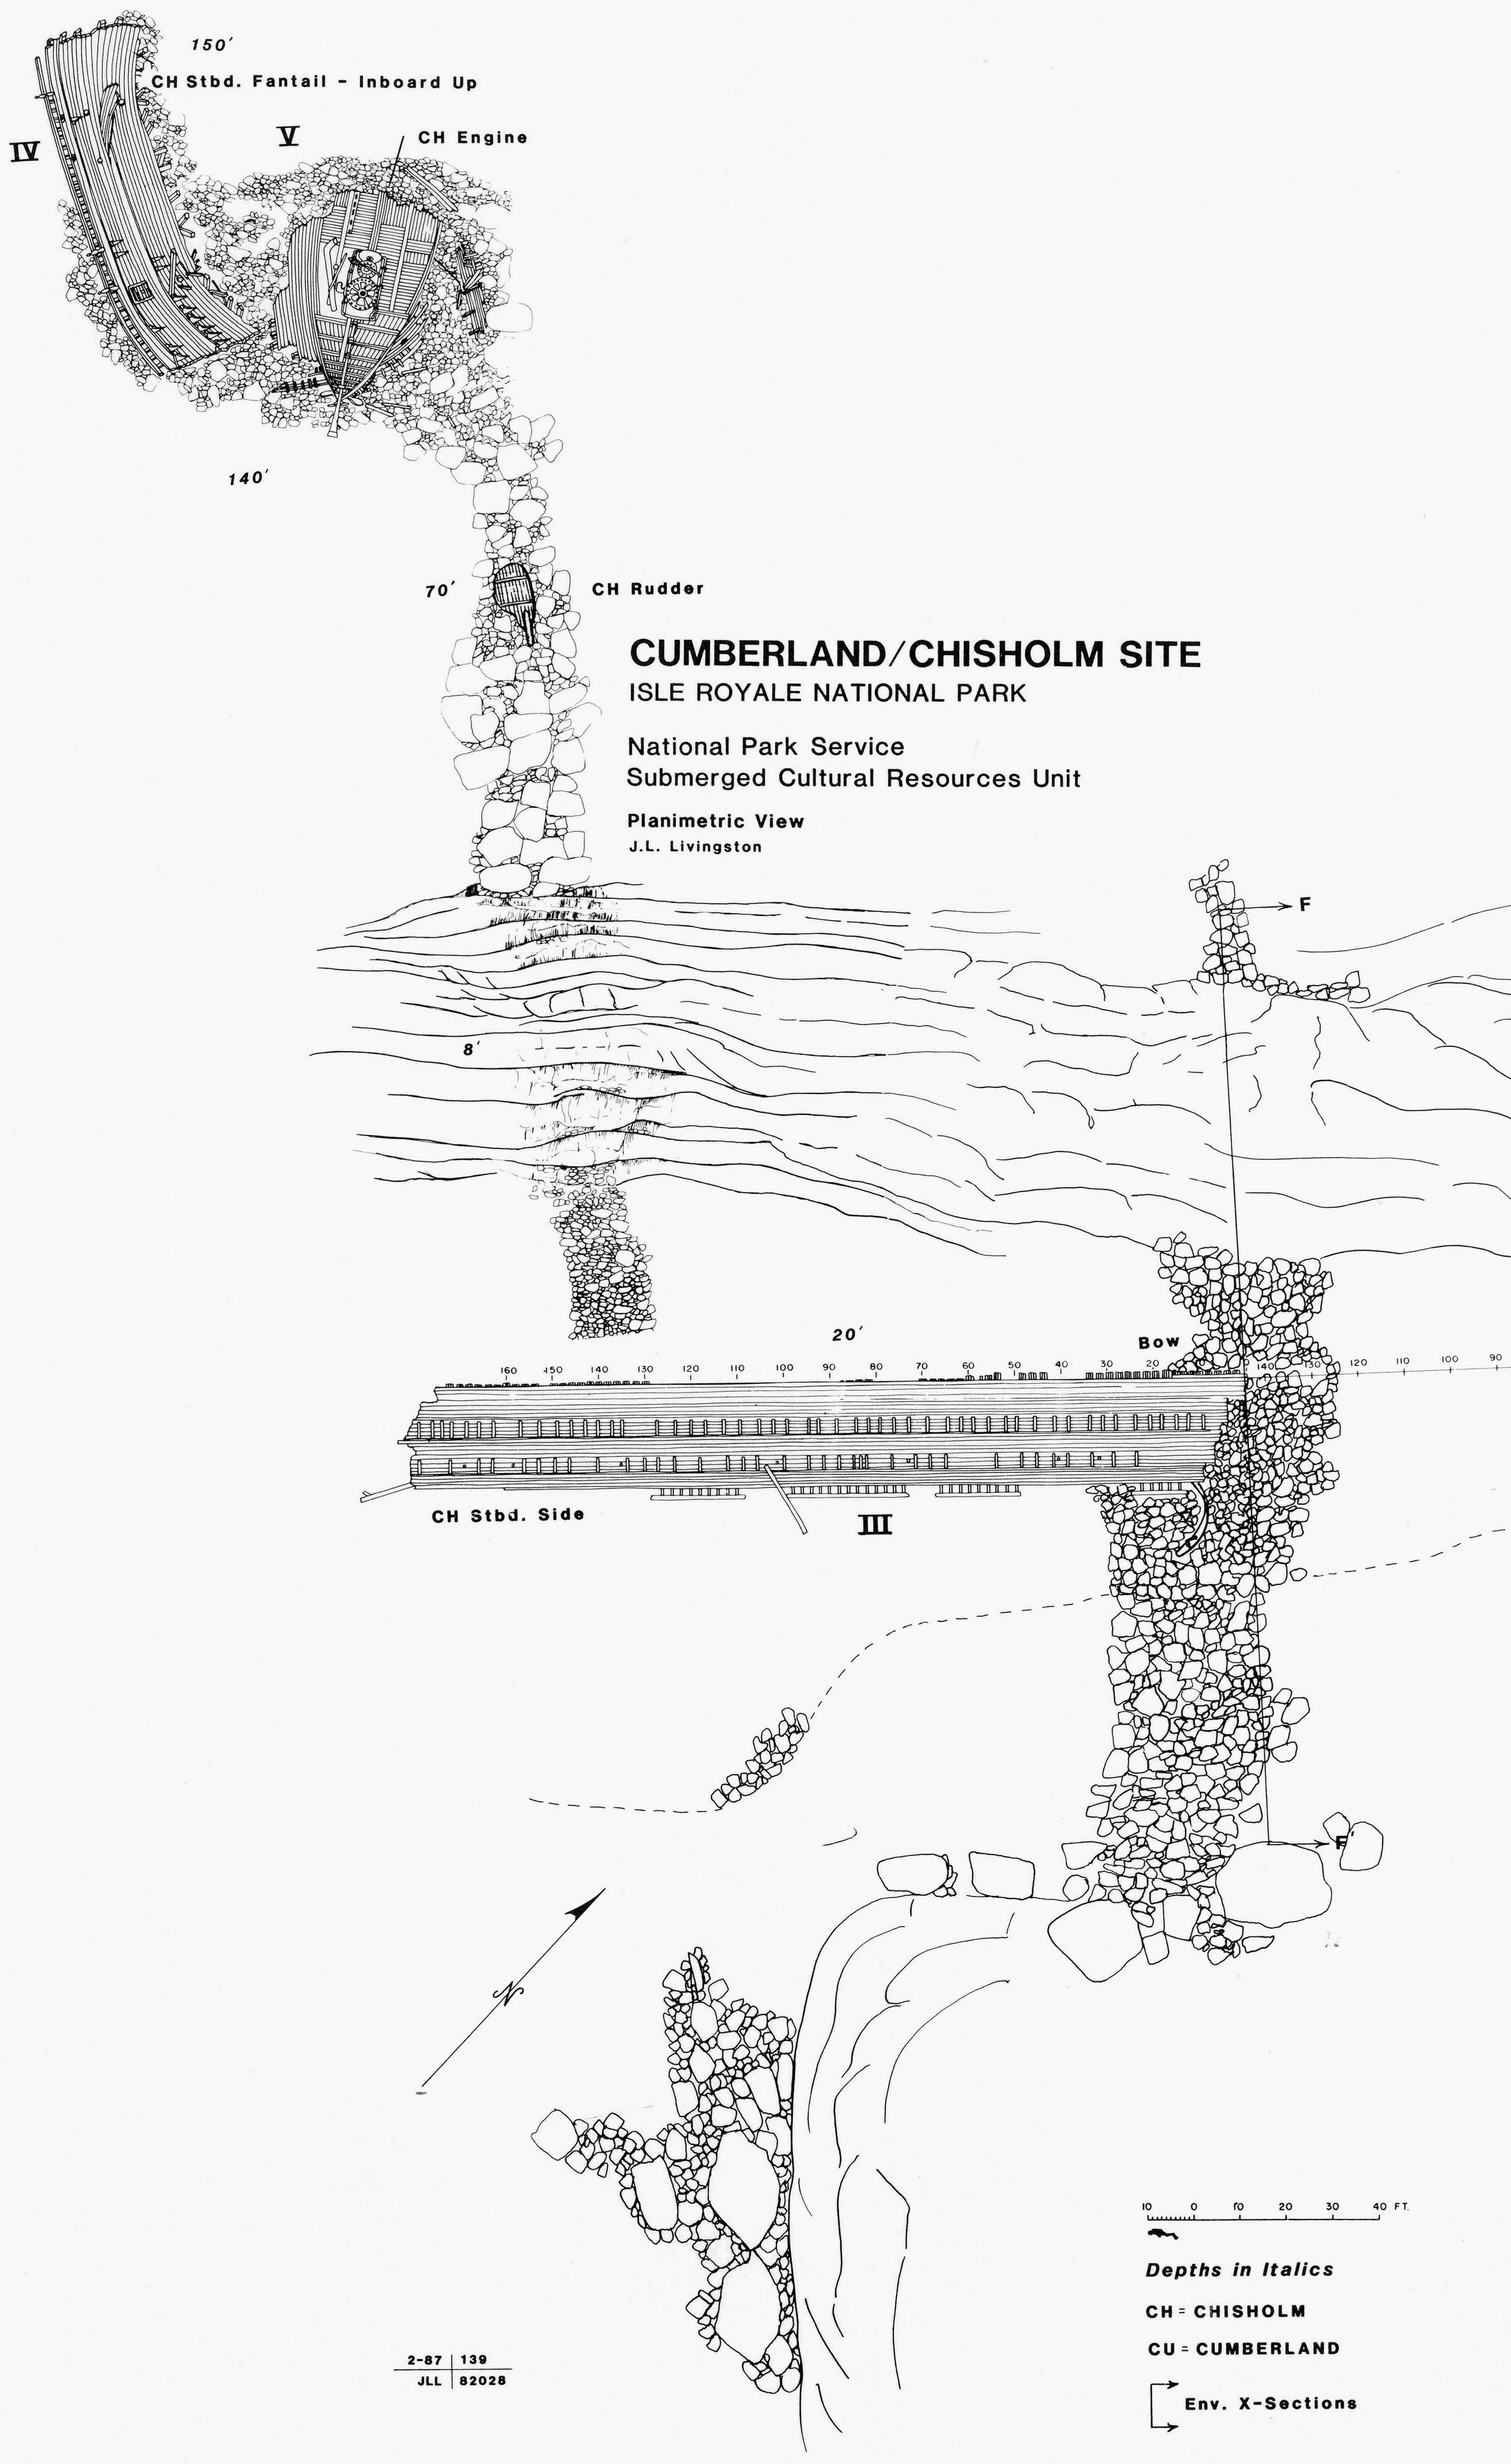 west side underwater artist sketch of the Cumberland and Chisholm shipwreck site